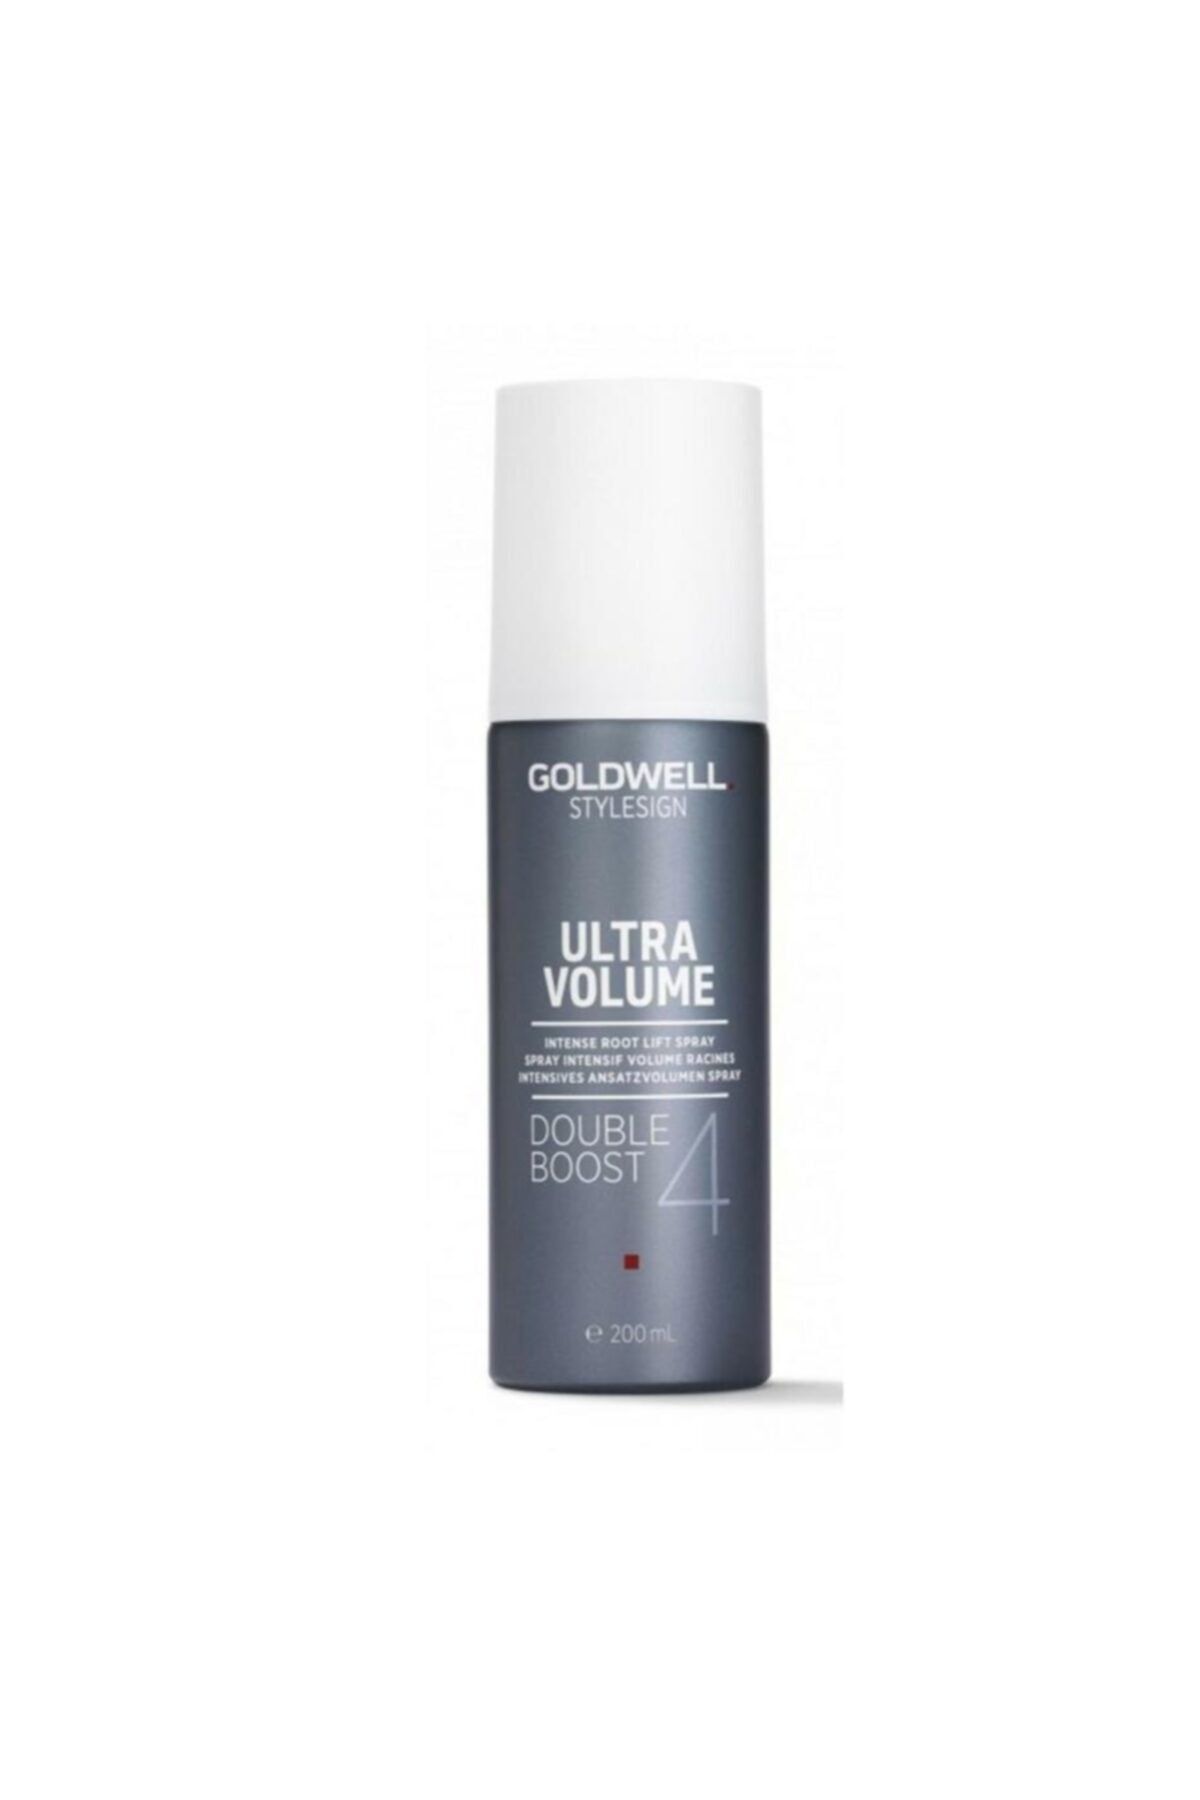 GOLDWELL Ultra Volume Double Boost 4 -200 ml